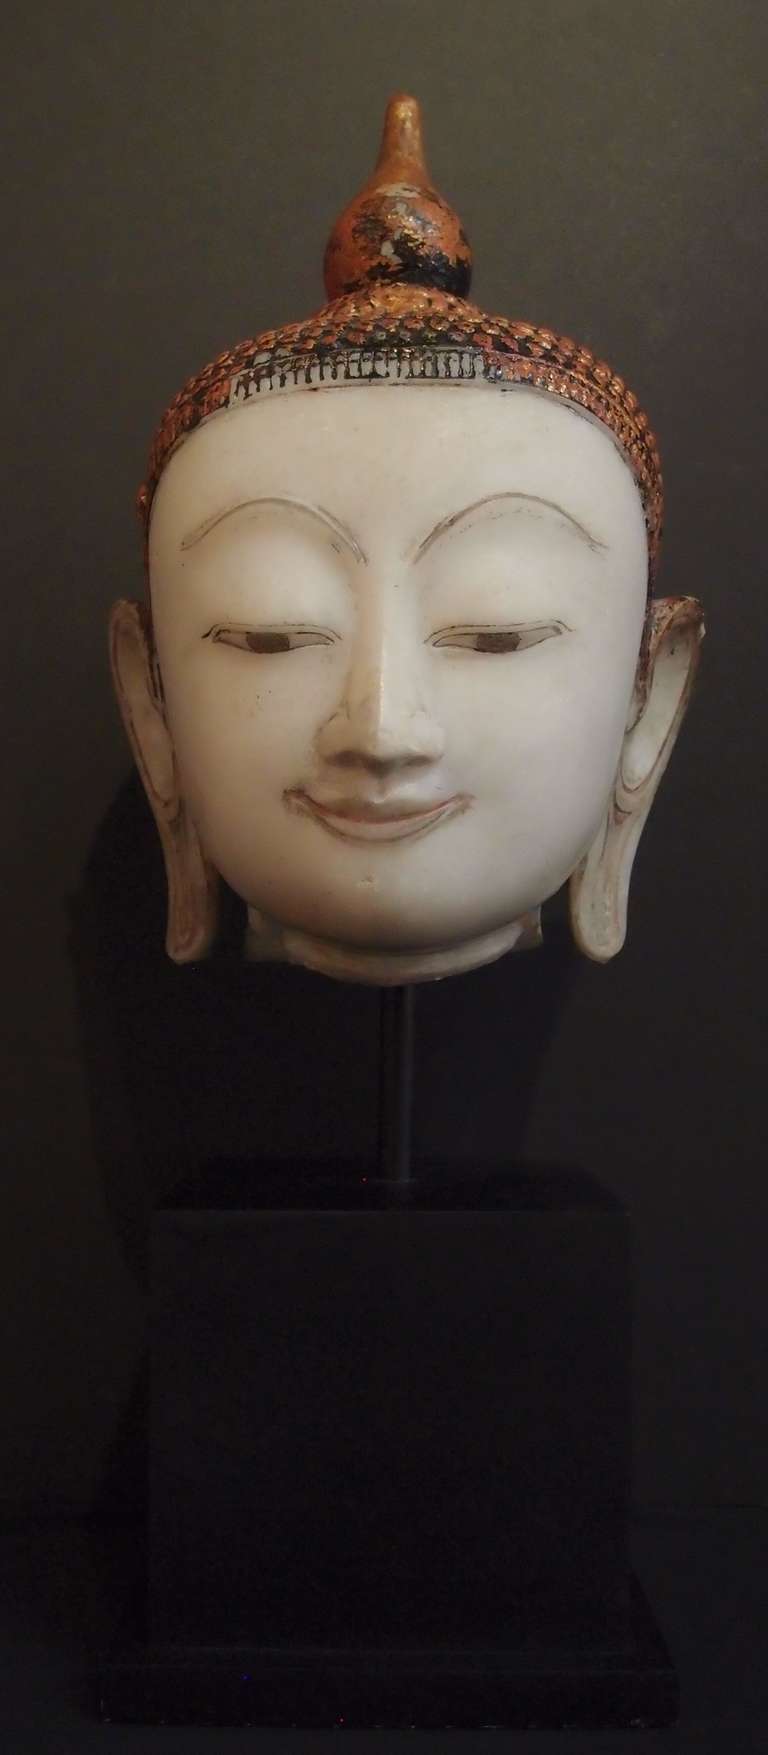 A life size marble head of the Buddha from the Shan States of Burma.  Carved from a single block of white marble, the Buddha's round, moon like face features high, arched brows, a straight aquiline nose, down cast eyes, and a sweet smile. The face